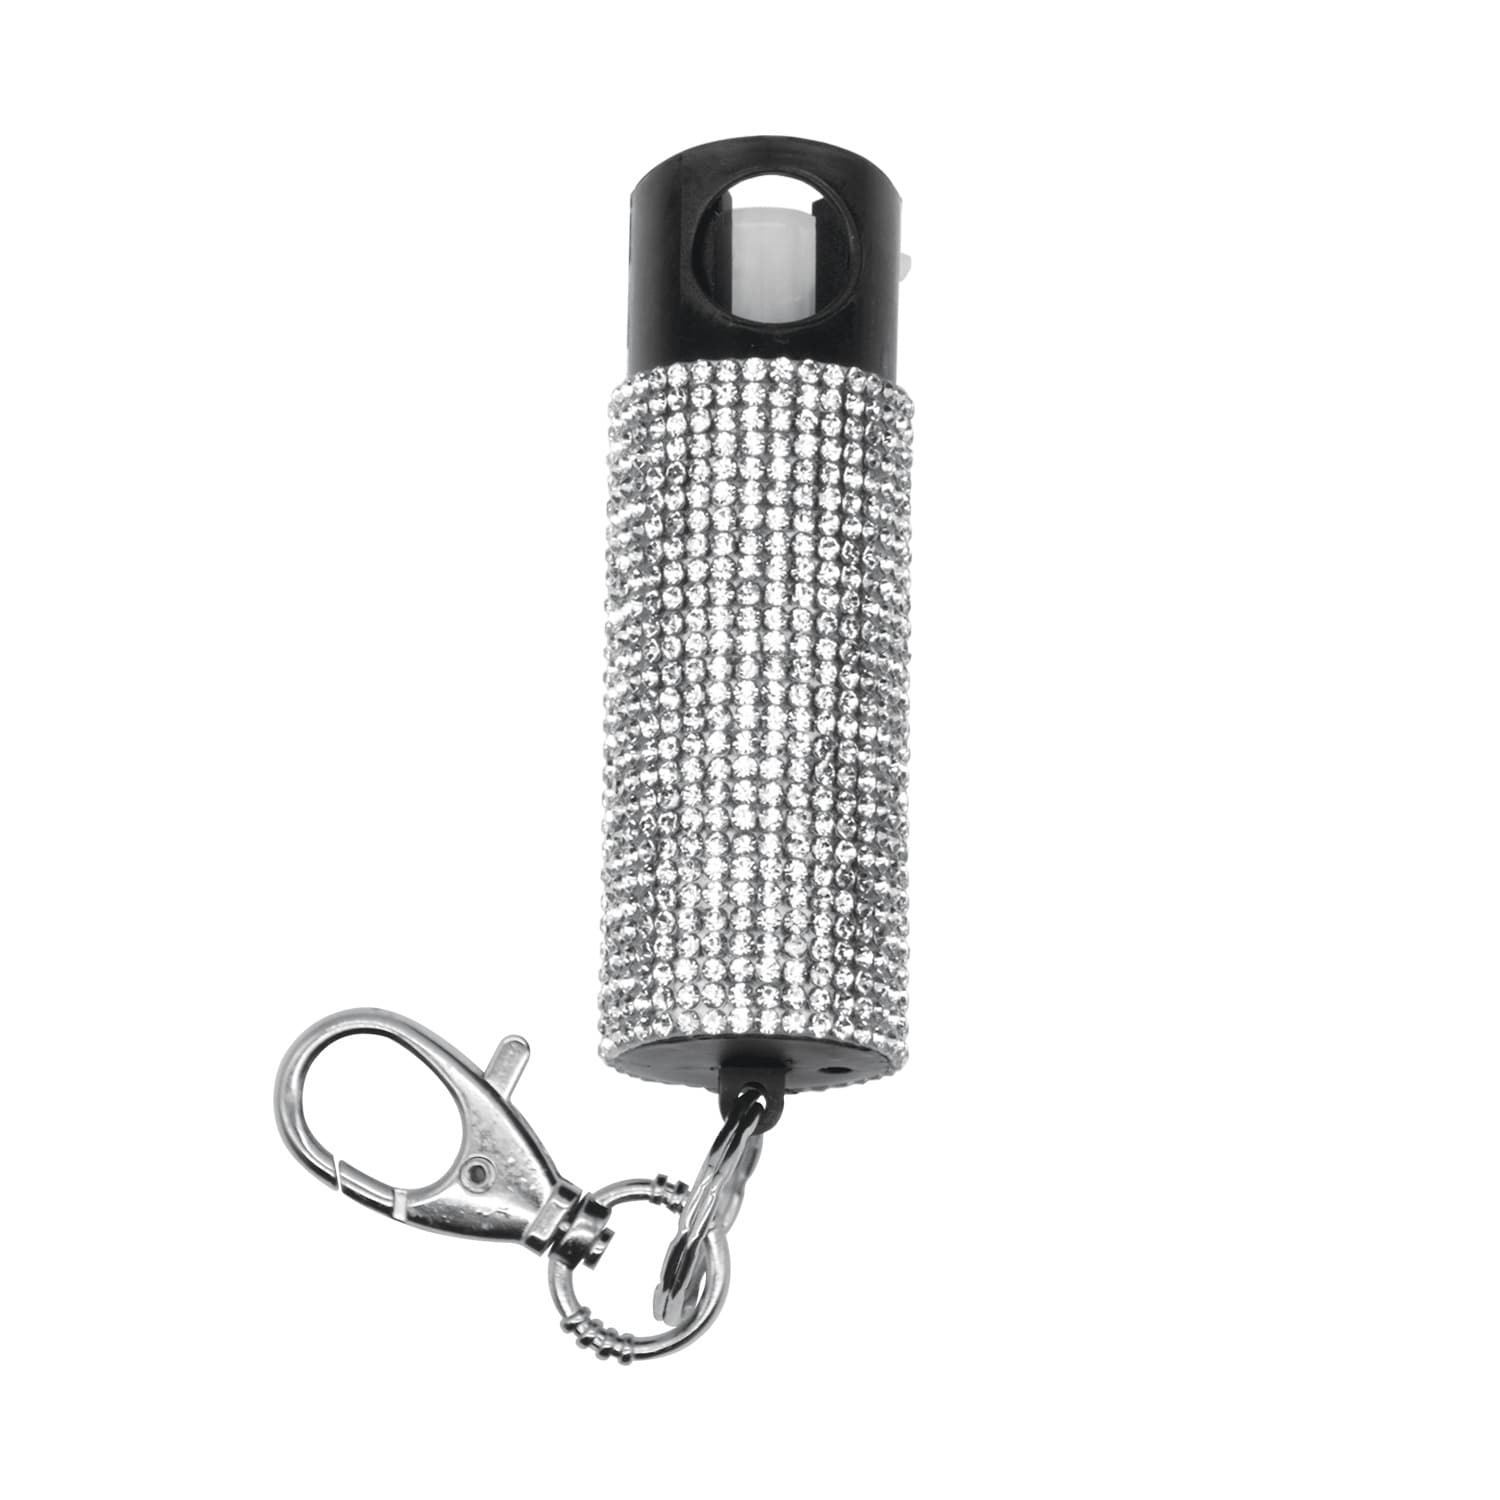 Guard Dog Security Guard Dog AccuFire Keychain Pepper Spray with